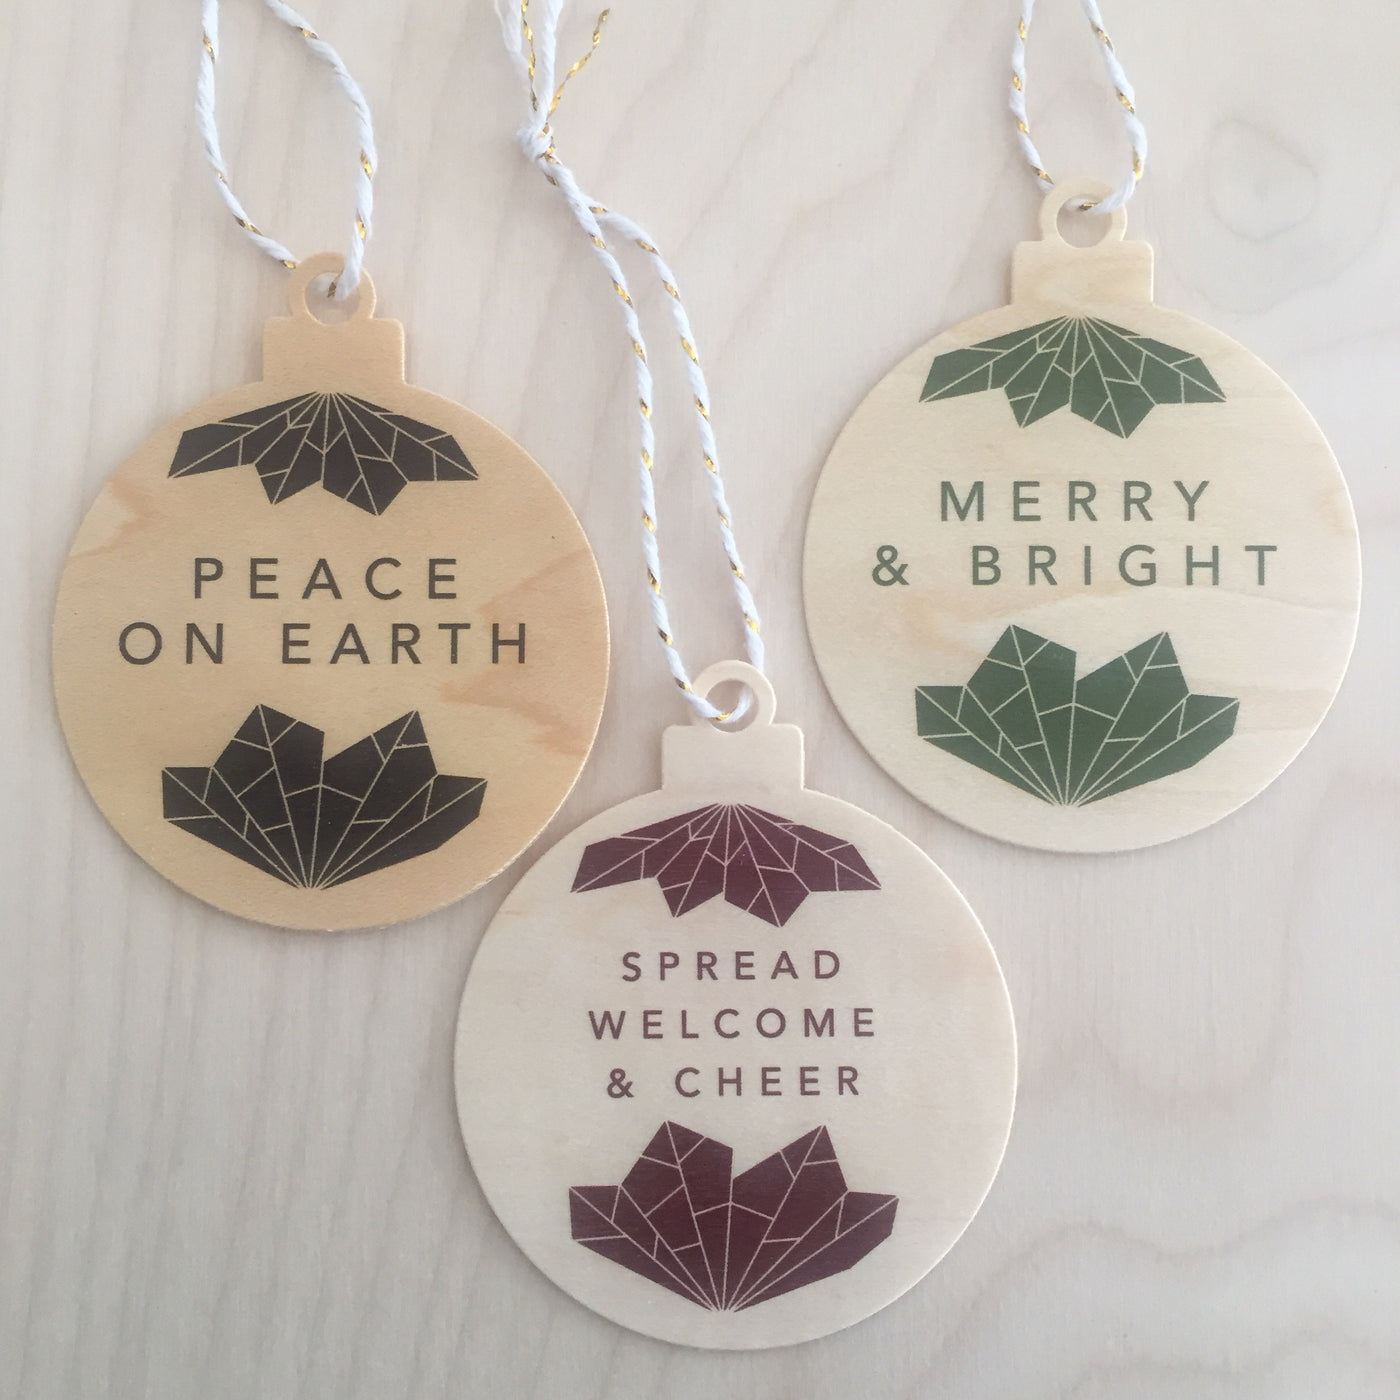 Wooden Ornaments/Tags